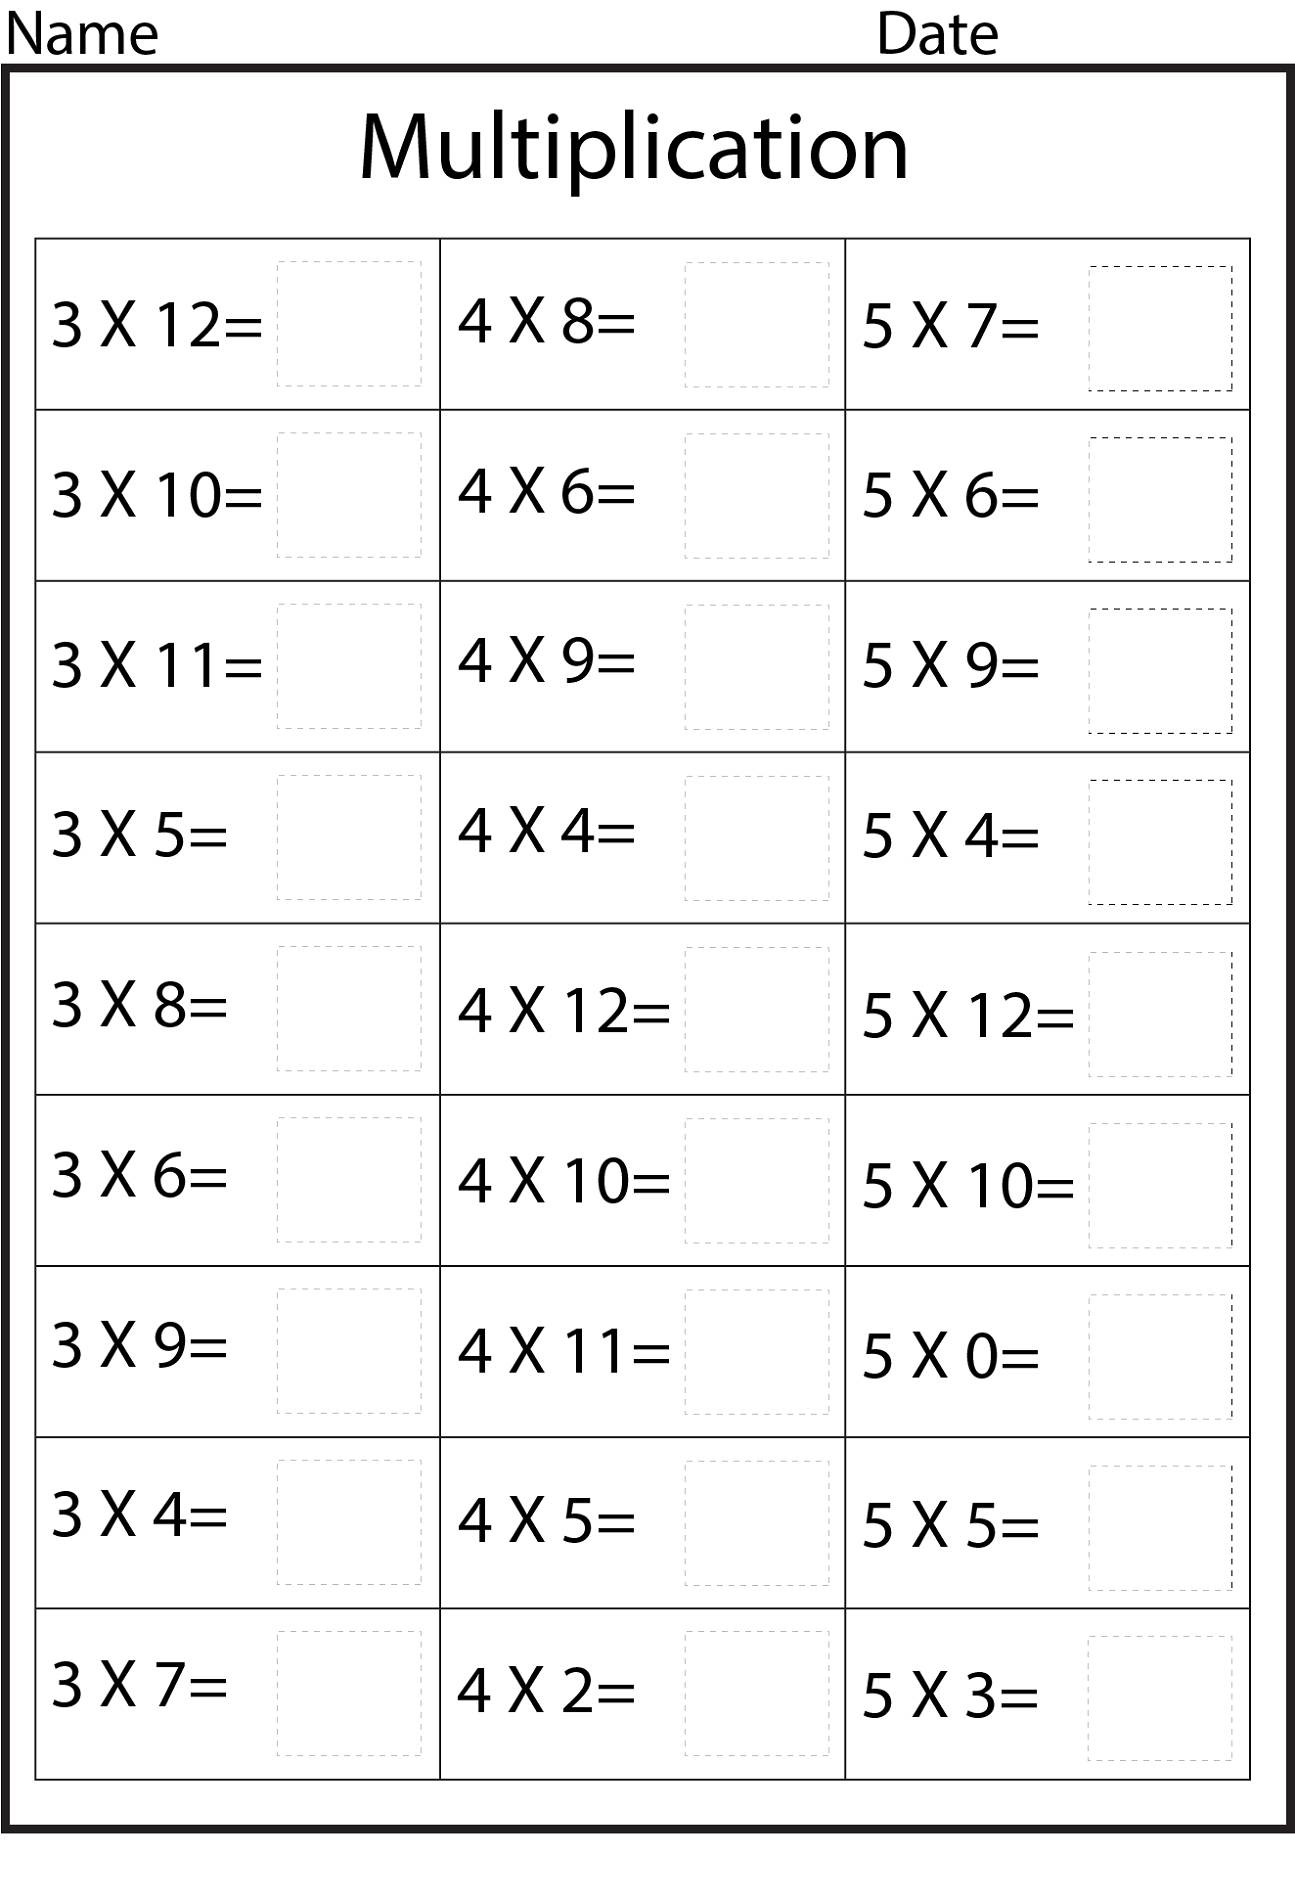 3 Times Table Worksheets | Activity Shelter pertaining to Multiplication Worksheets 3 And 4 Times Tables